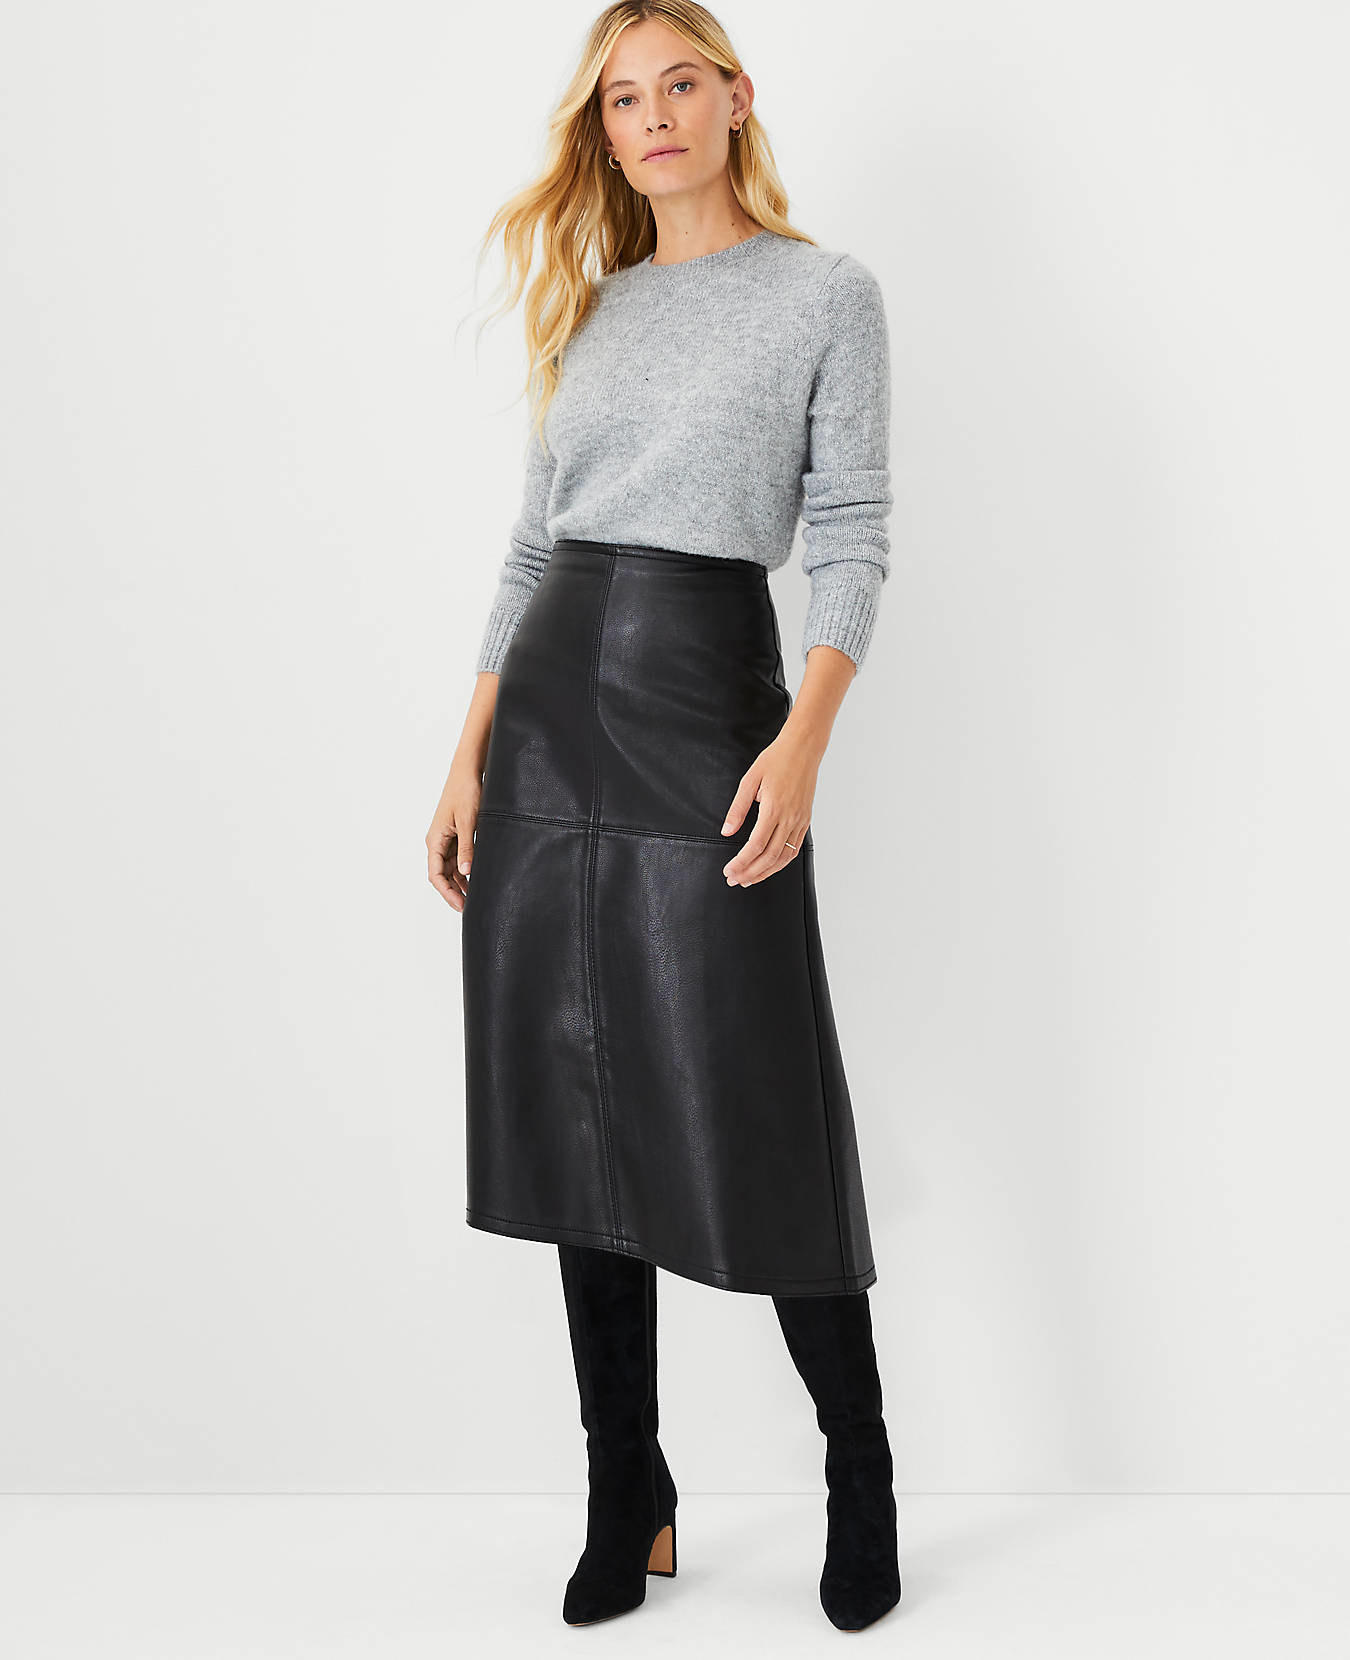 model wearing black faux leather skirt with knee high boots and gray sweater